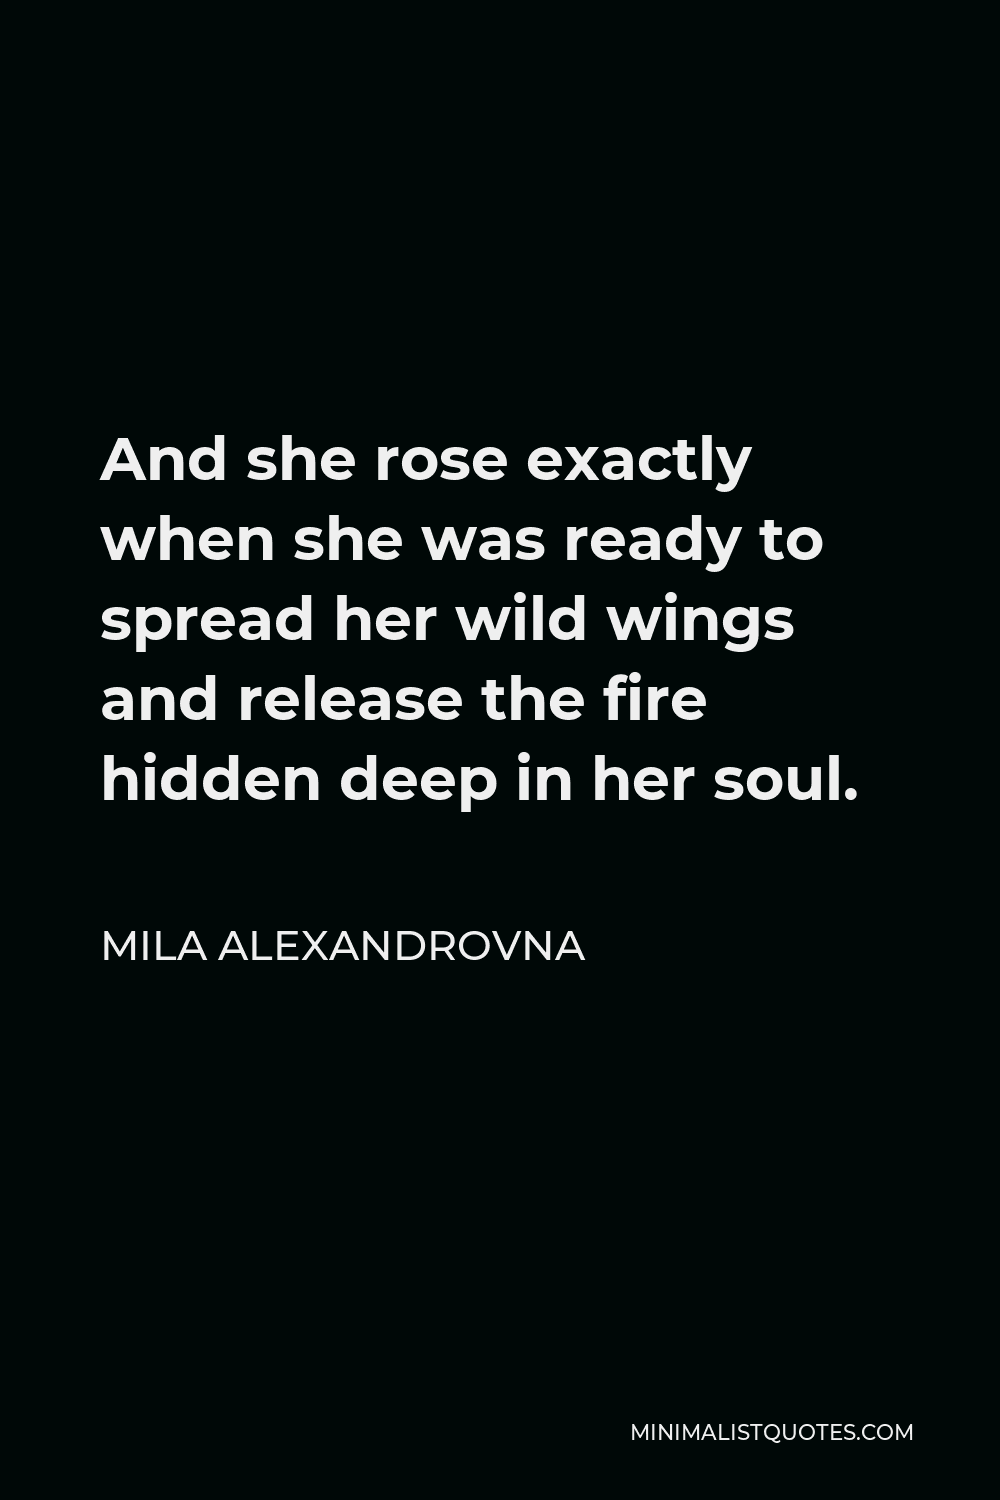 Mila Alexandrovna Quote: And She Rose Exactly When She Was Ready To Spread Her Wild Wings And Release The Fire Hidden Deep In Her Soul.